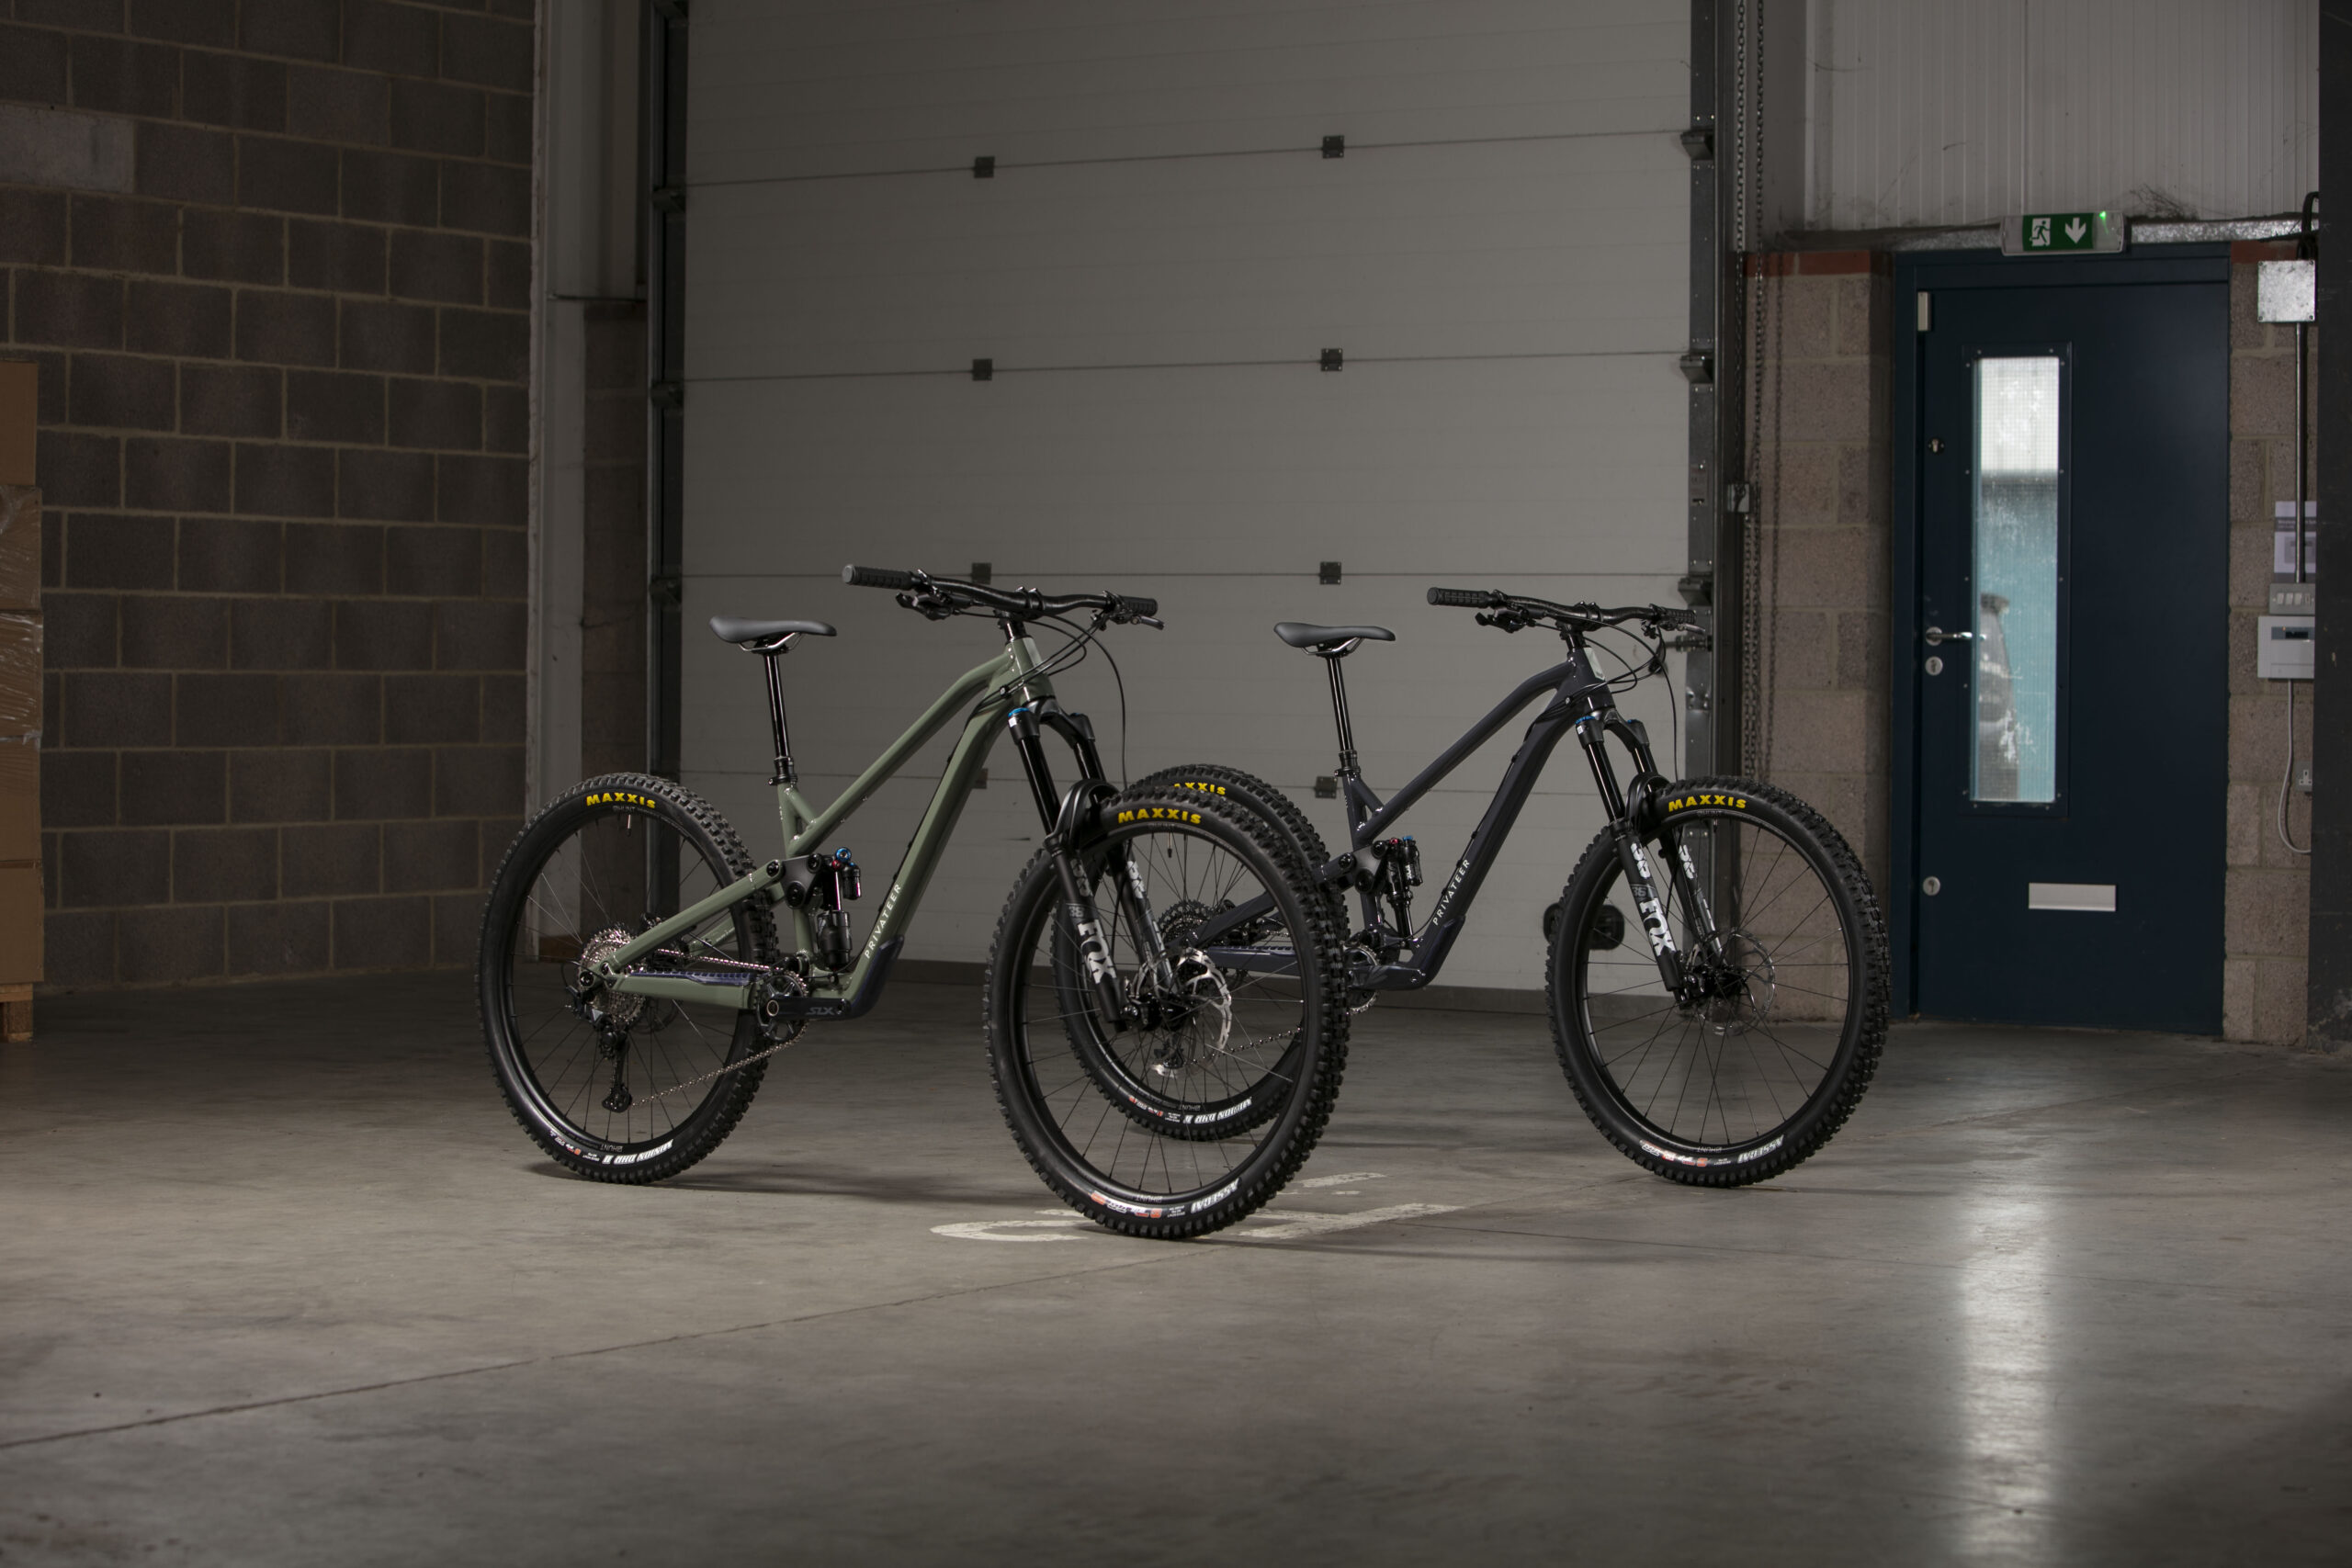 Privateer Gen 2 Bikes Land with A-L-P Suspension, Adjustable Geometry & More